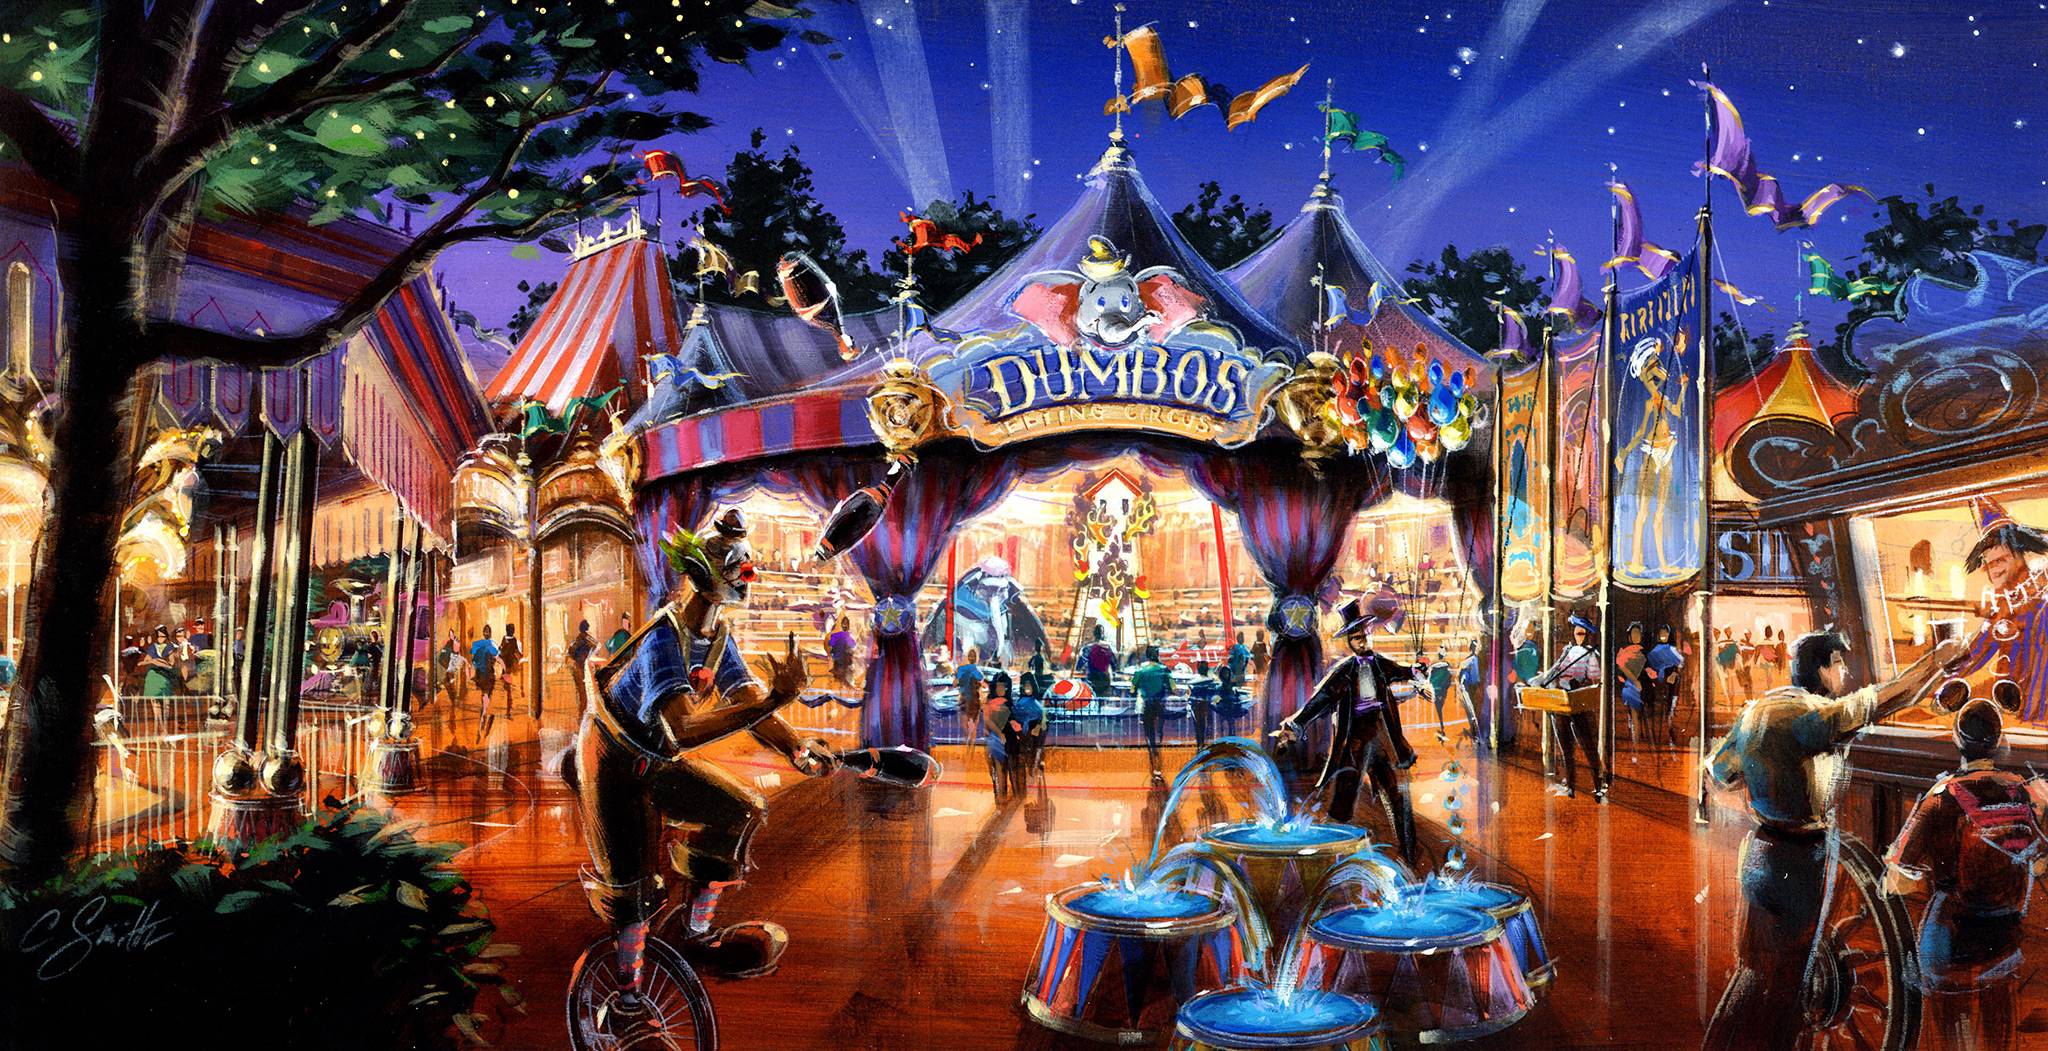 One of the Magic Kingdom's most beloved attractions, Dumbo the Flying Elephant, is completely re-imagined when the circus comes to town. Guests are invited to step into the big top and join the circus before their magical flight over Fantasyland